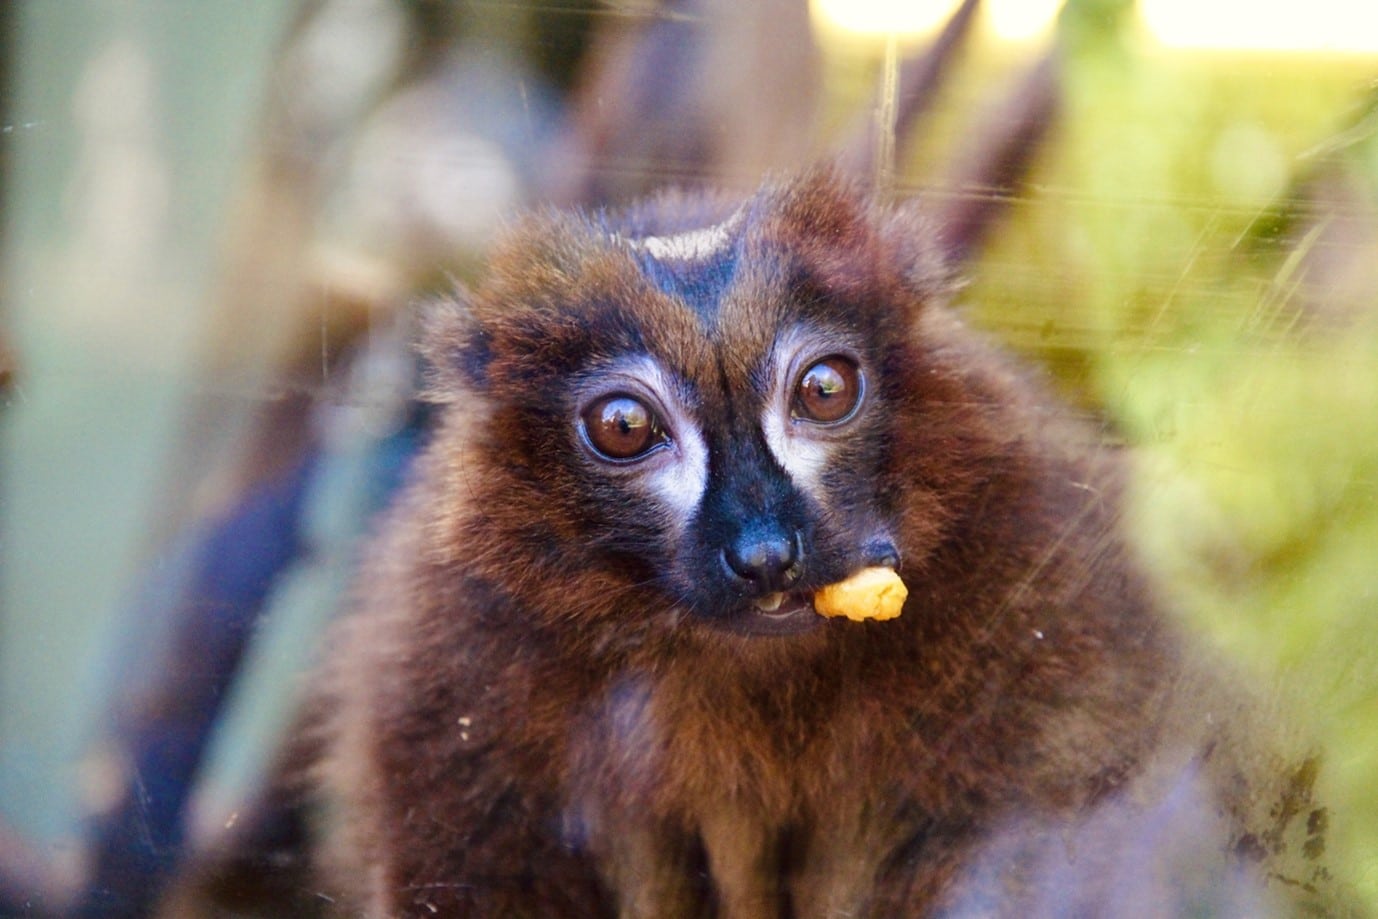 An image of a red-bellied lemur